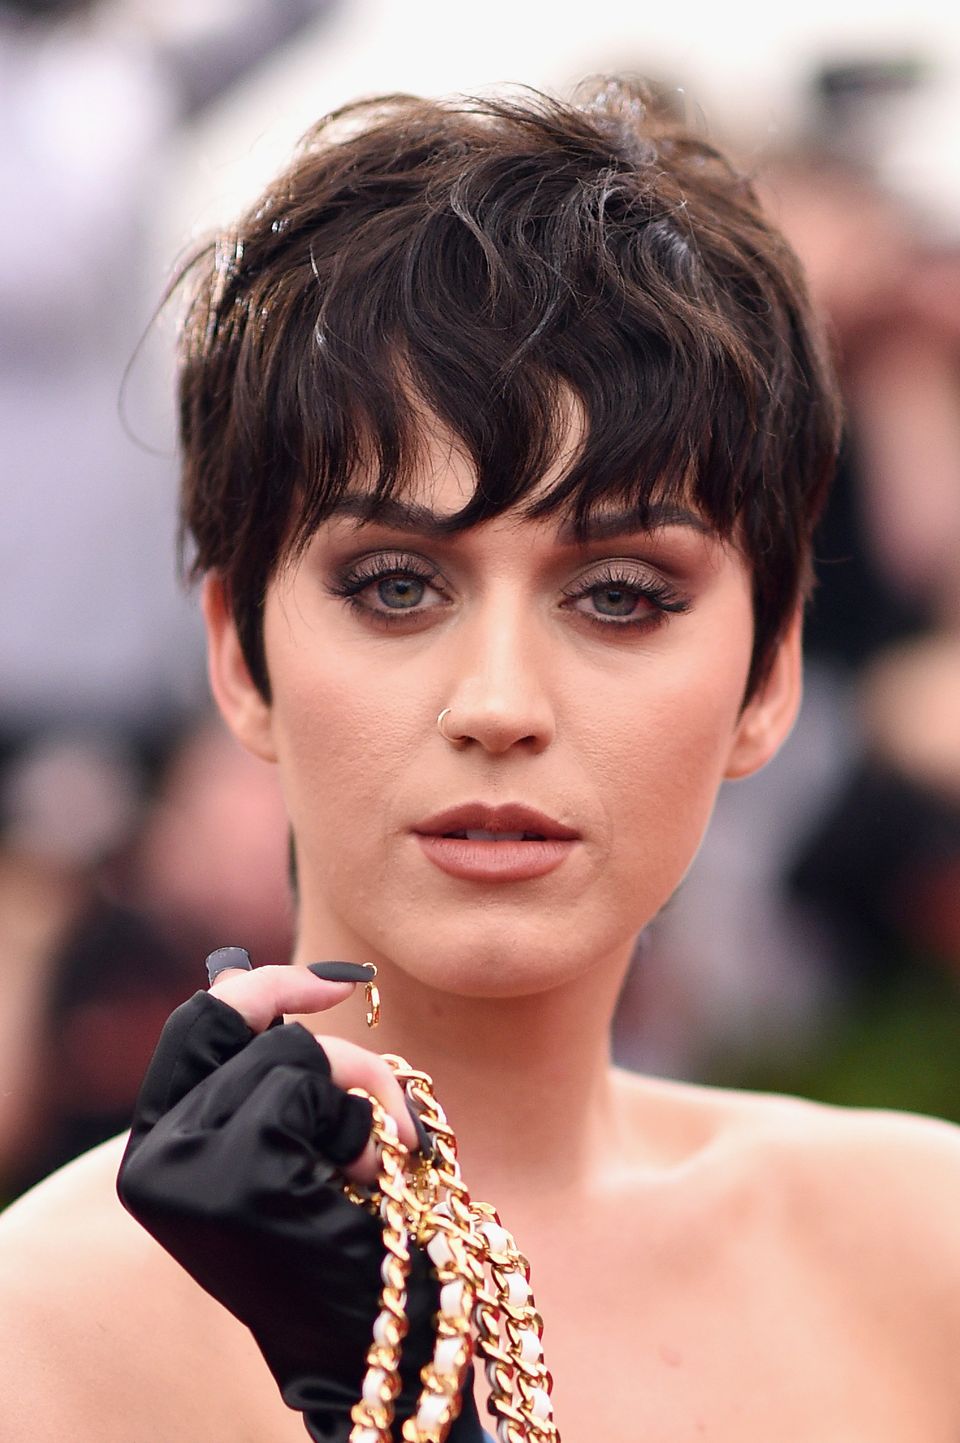 Women's Short Haircuts famous actress Getty Images